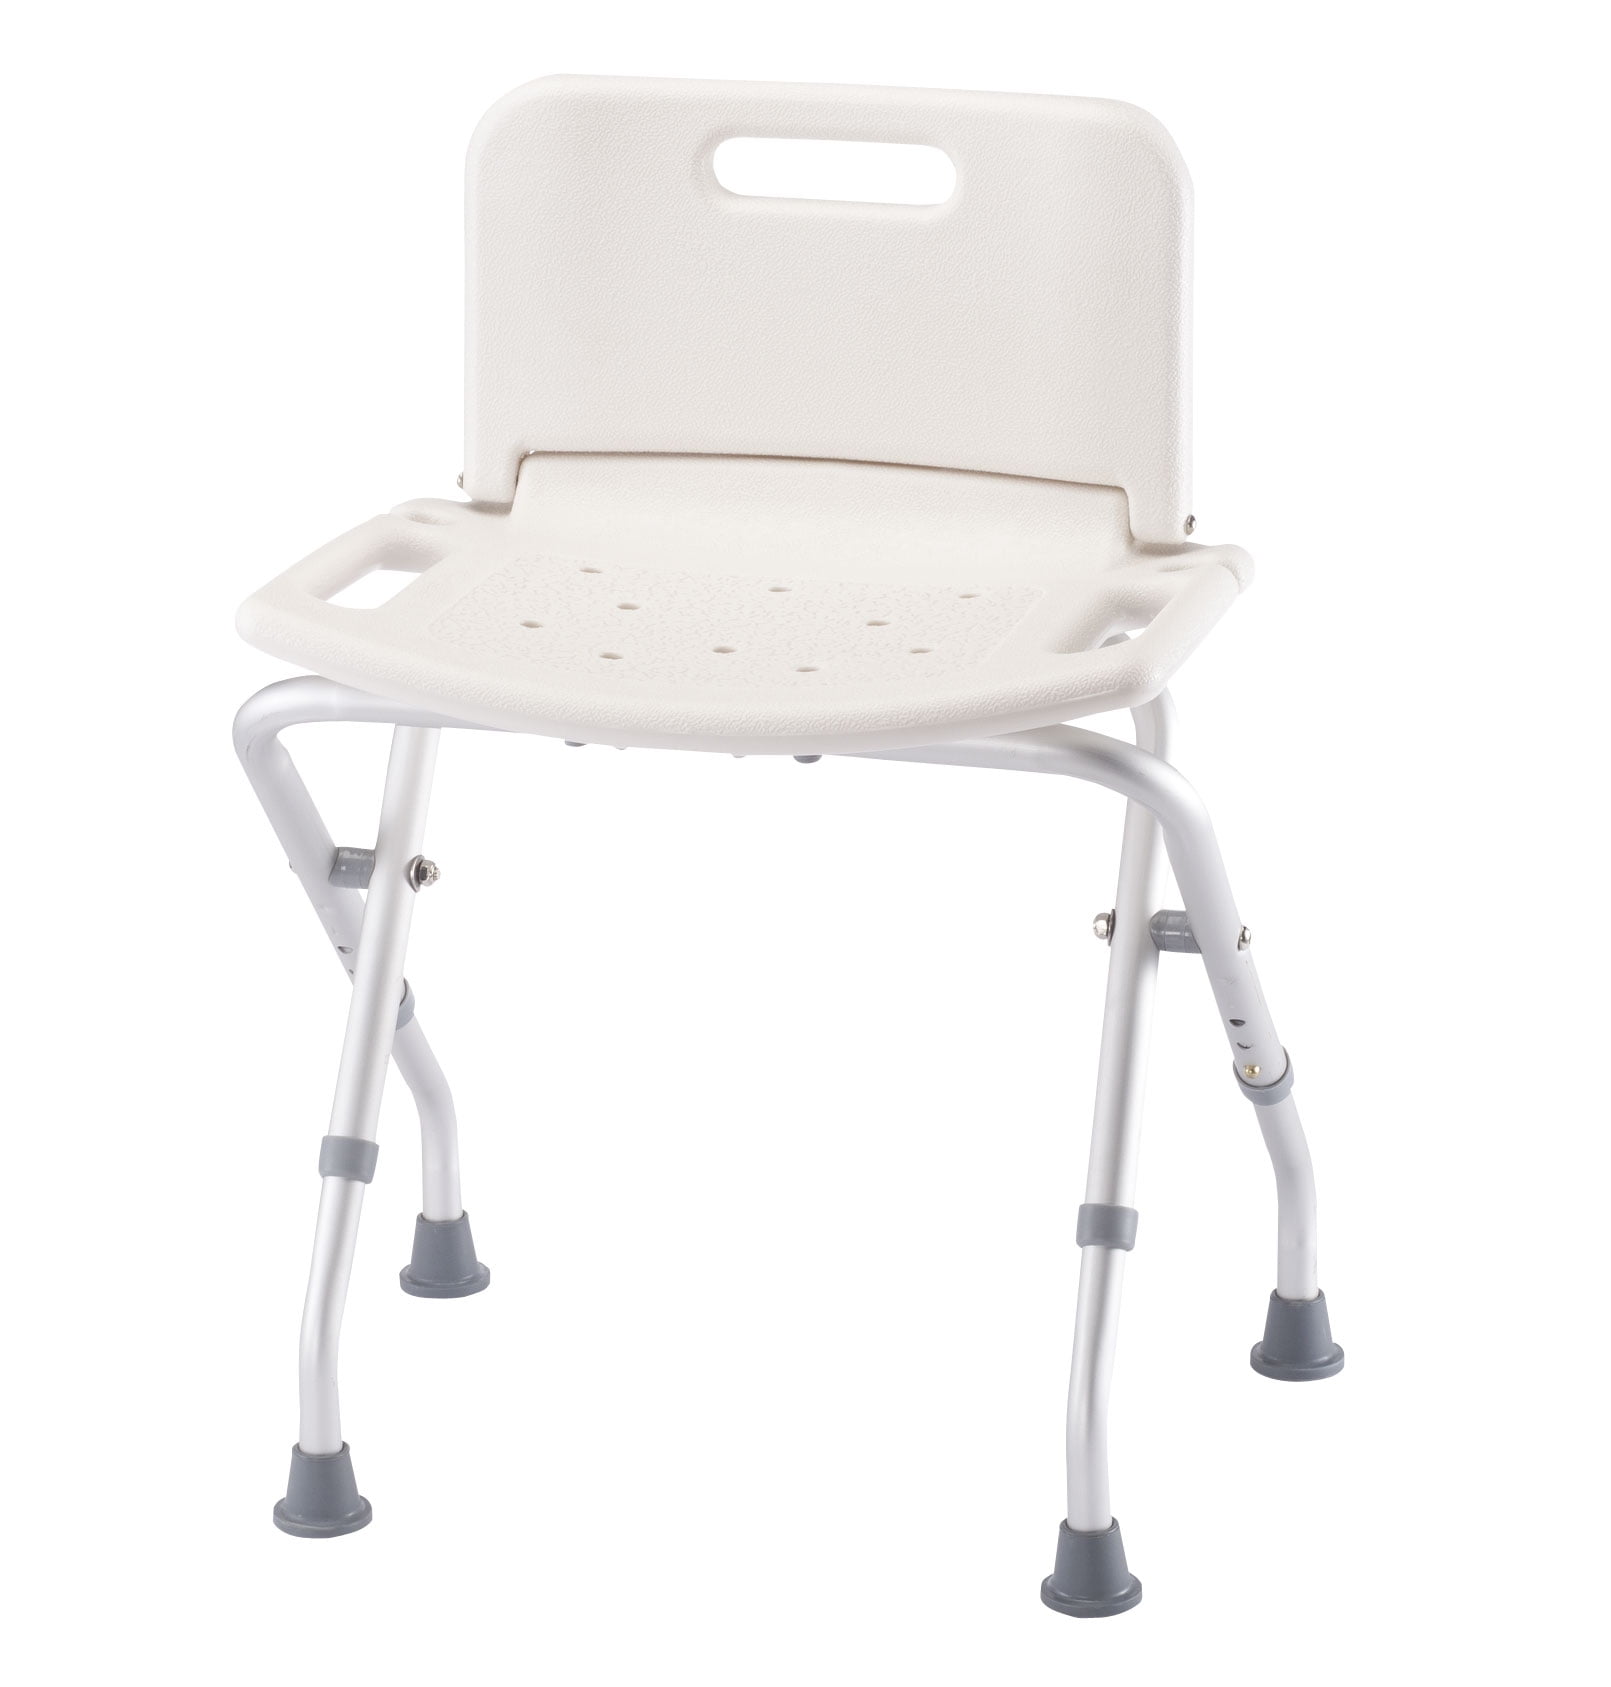 Folding Bath Seat with Back Support, Portable Shower Bench, White